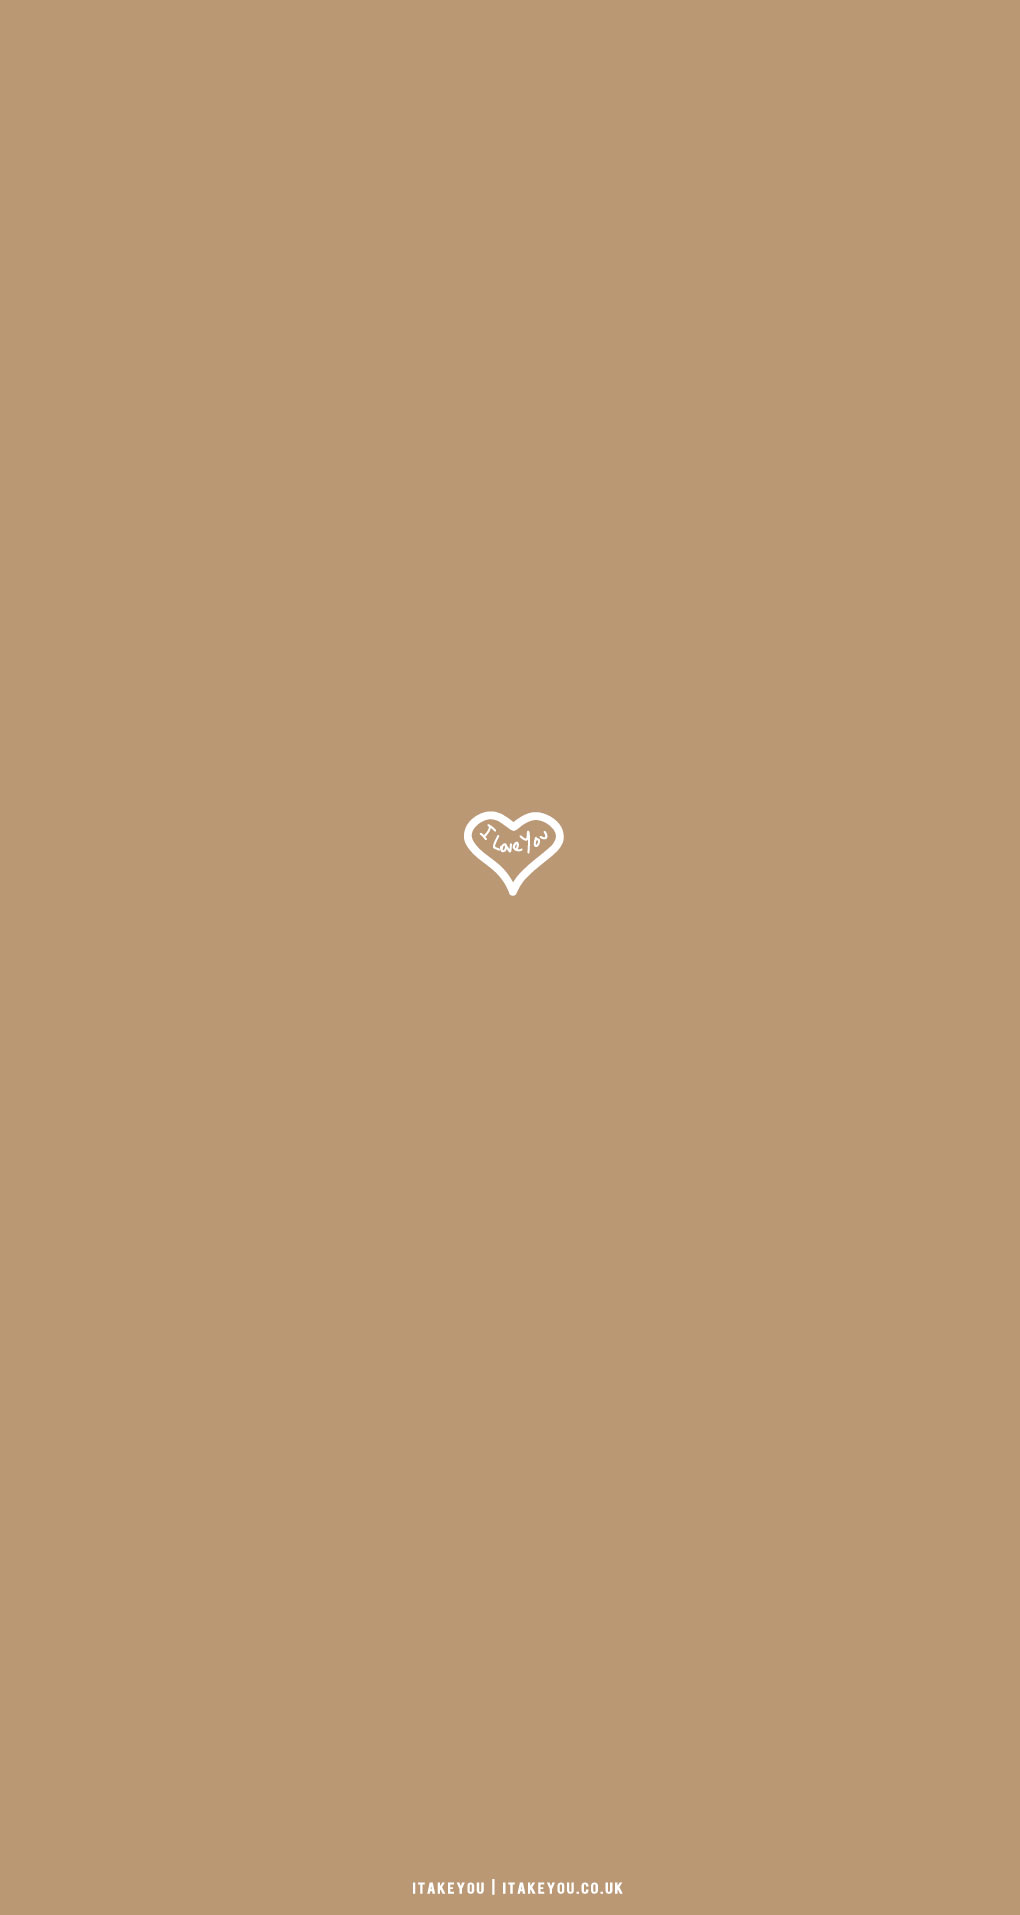 Cute Brown Aesthetic Wallpaper for Phone, Love Heart I Take You. Wedding Readings. Wedding Ideas